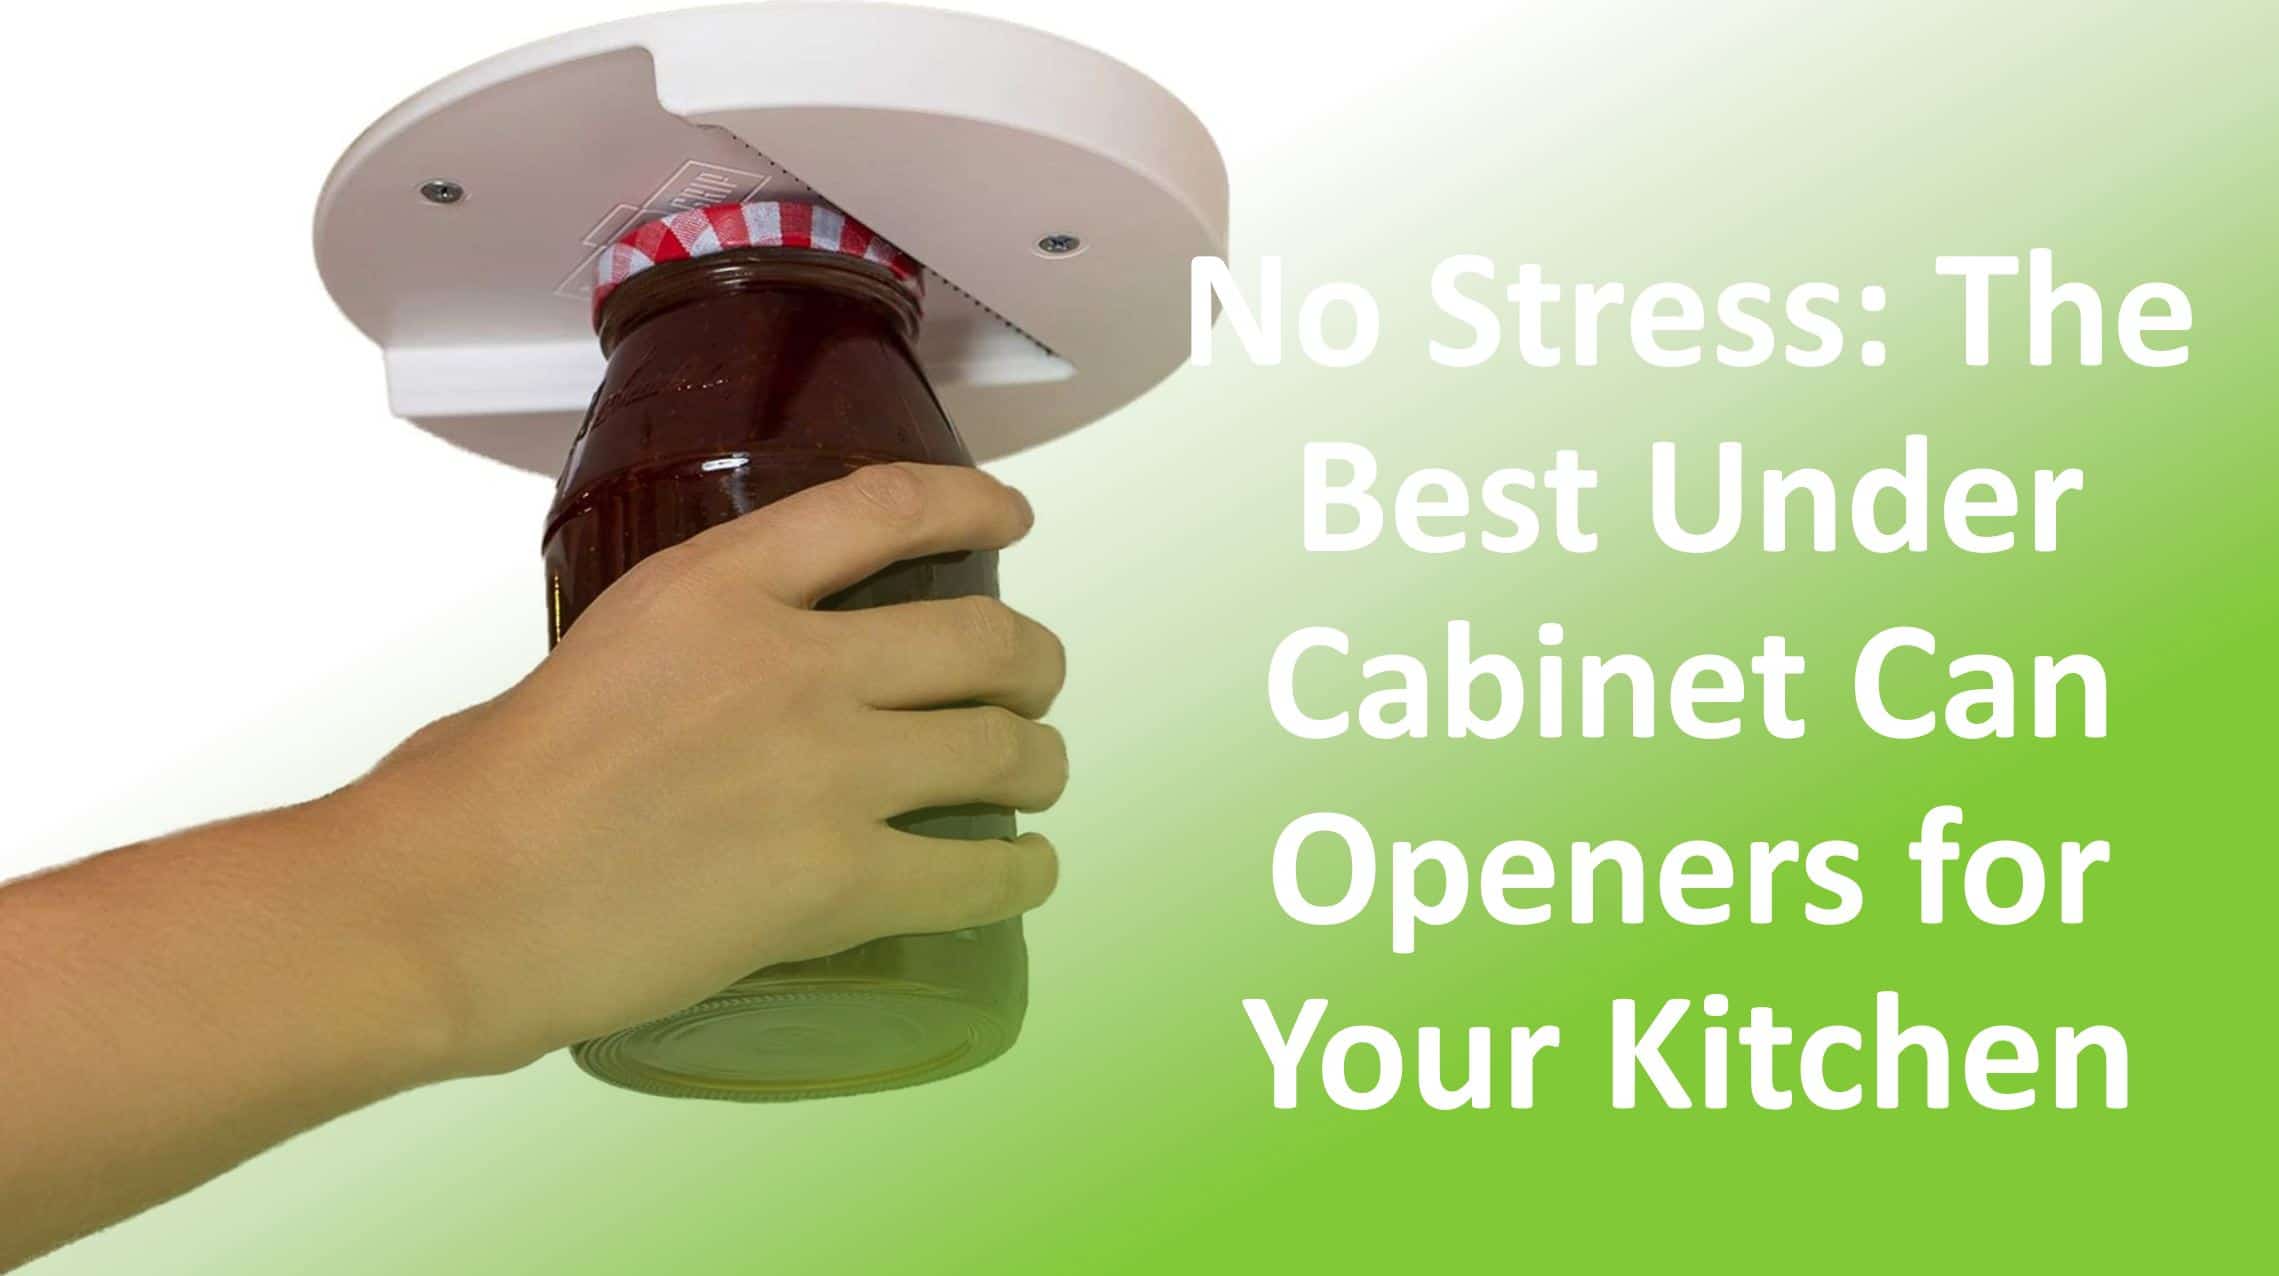 https://www.foodchamps.org/wp-content/uploads/2020/10/no-stress-the-best-under-cabinet-car-openers-for-your-kitchen.jpg